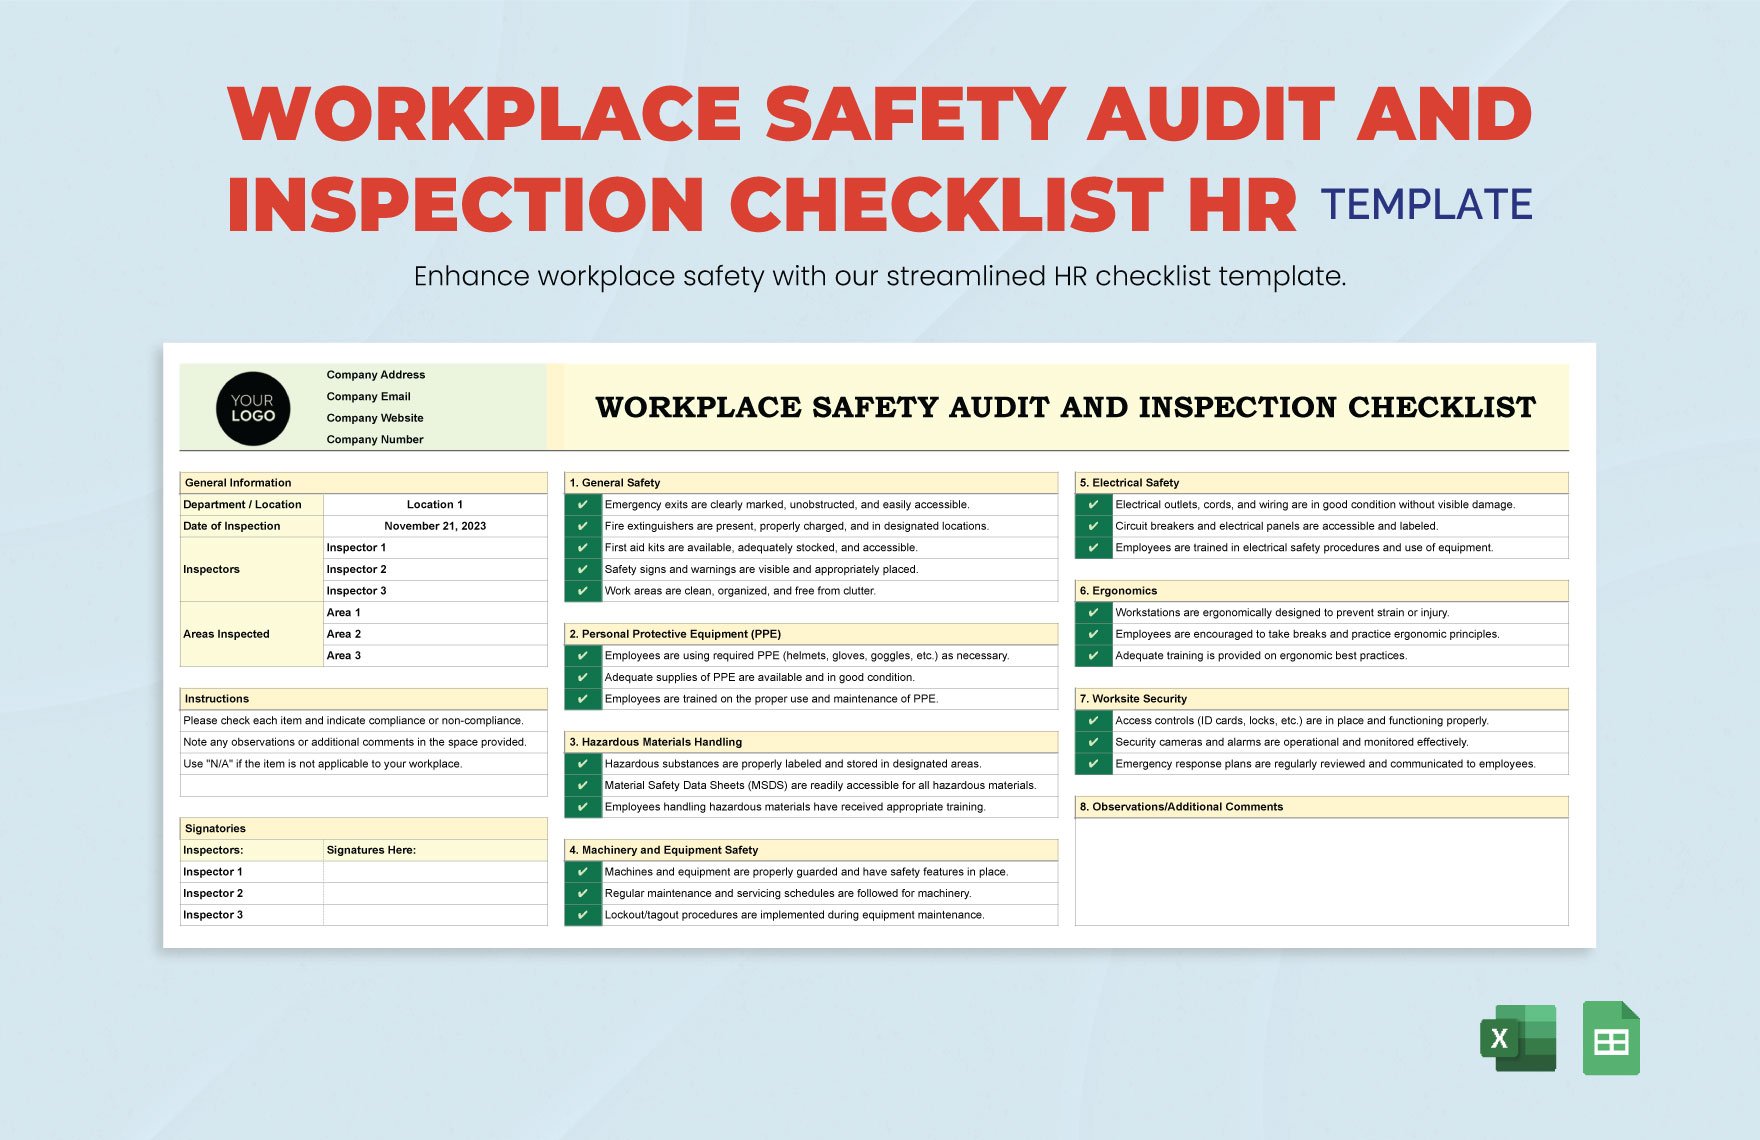 Workplace Safety Audit and Inspection Checklist HR Template